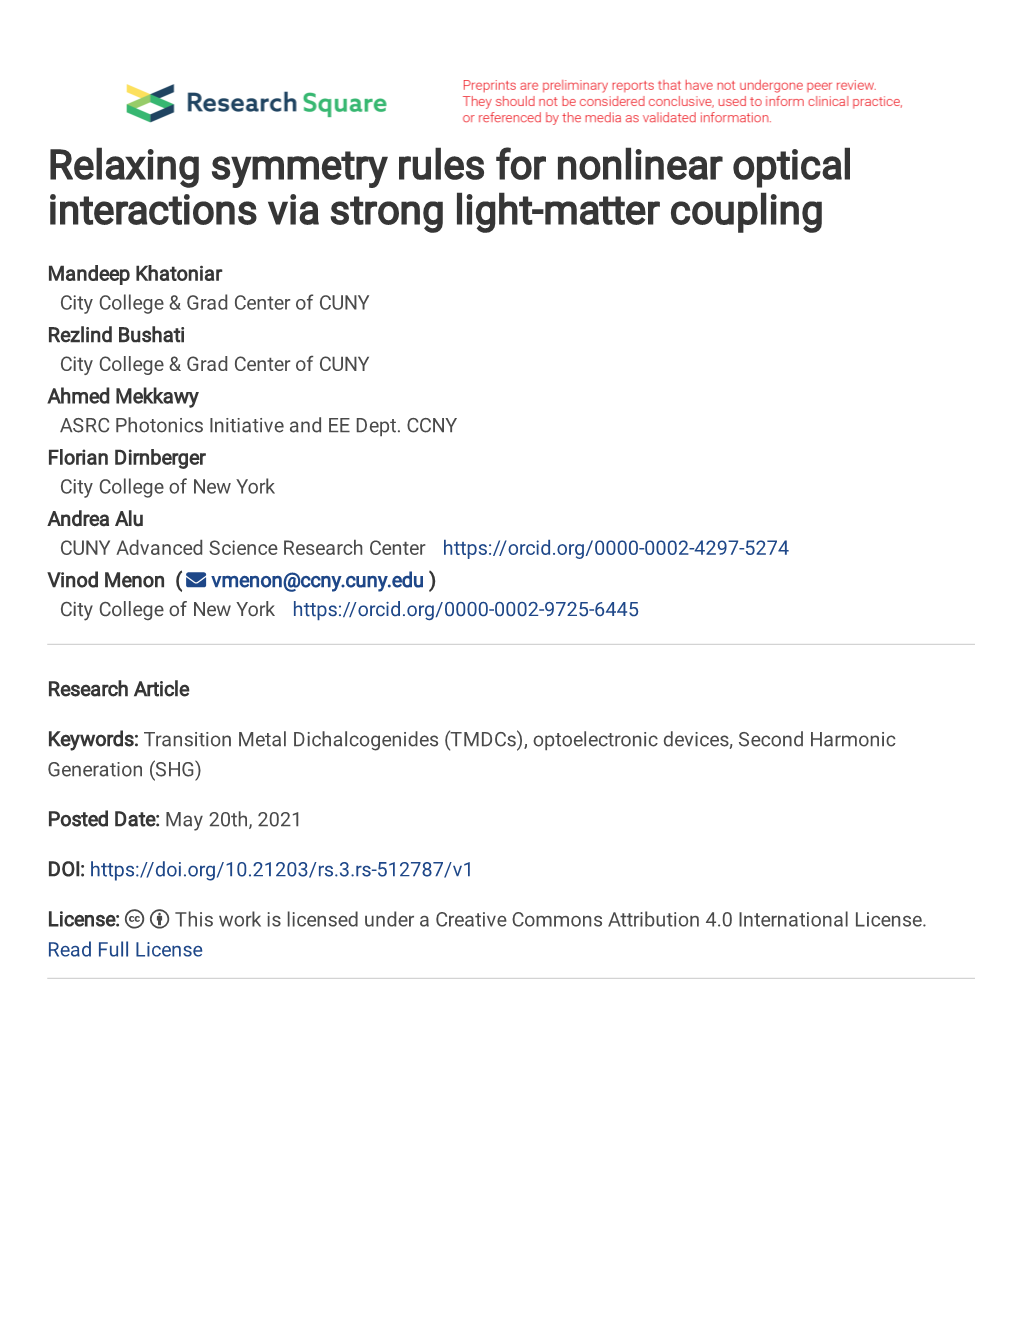 Relaxing Symmetry Rules for Nonlinear Optical Interactions Via Strong Light-Matter Coupling